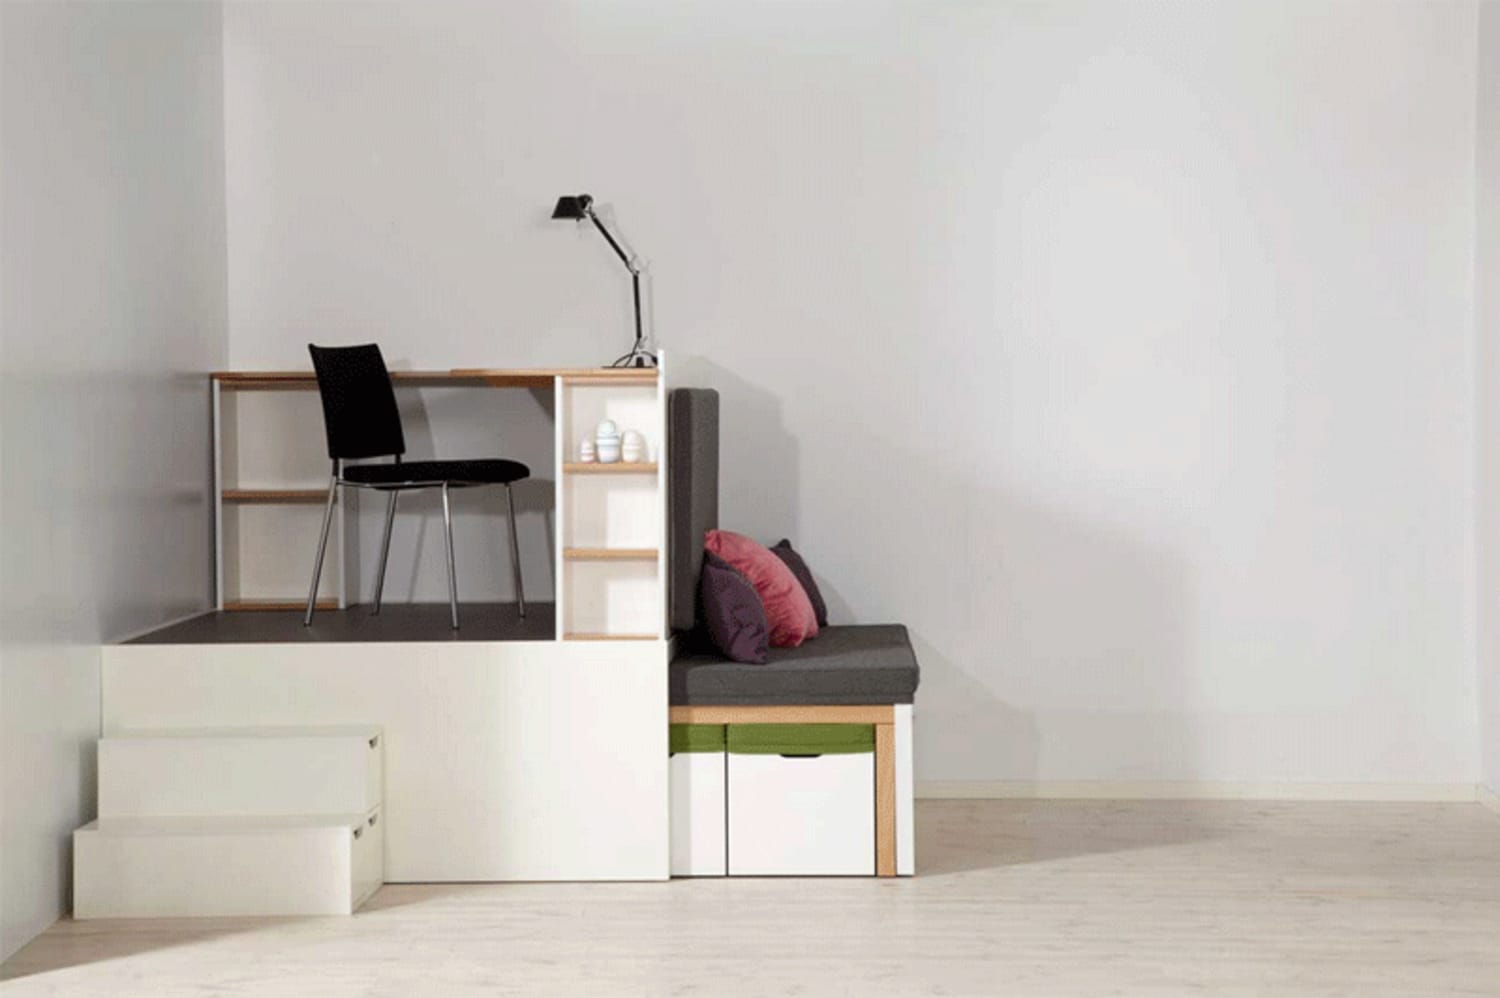 10 Mesmerizing GIFs of Small-Space Living